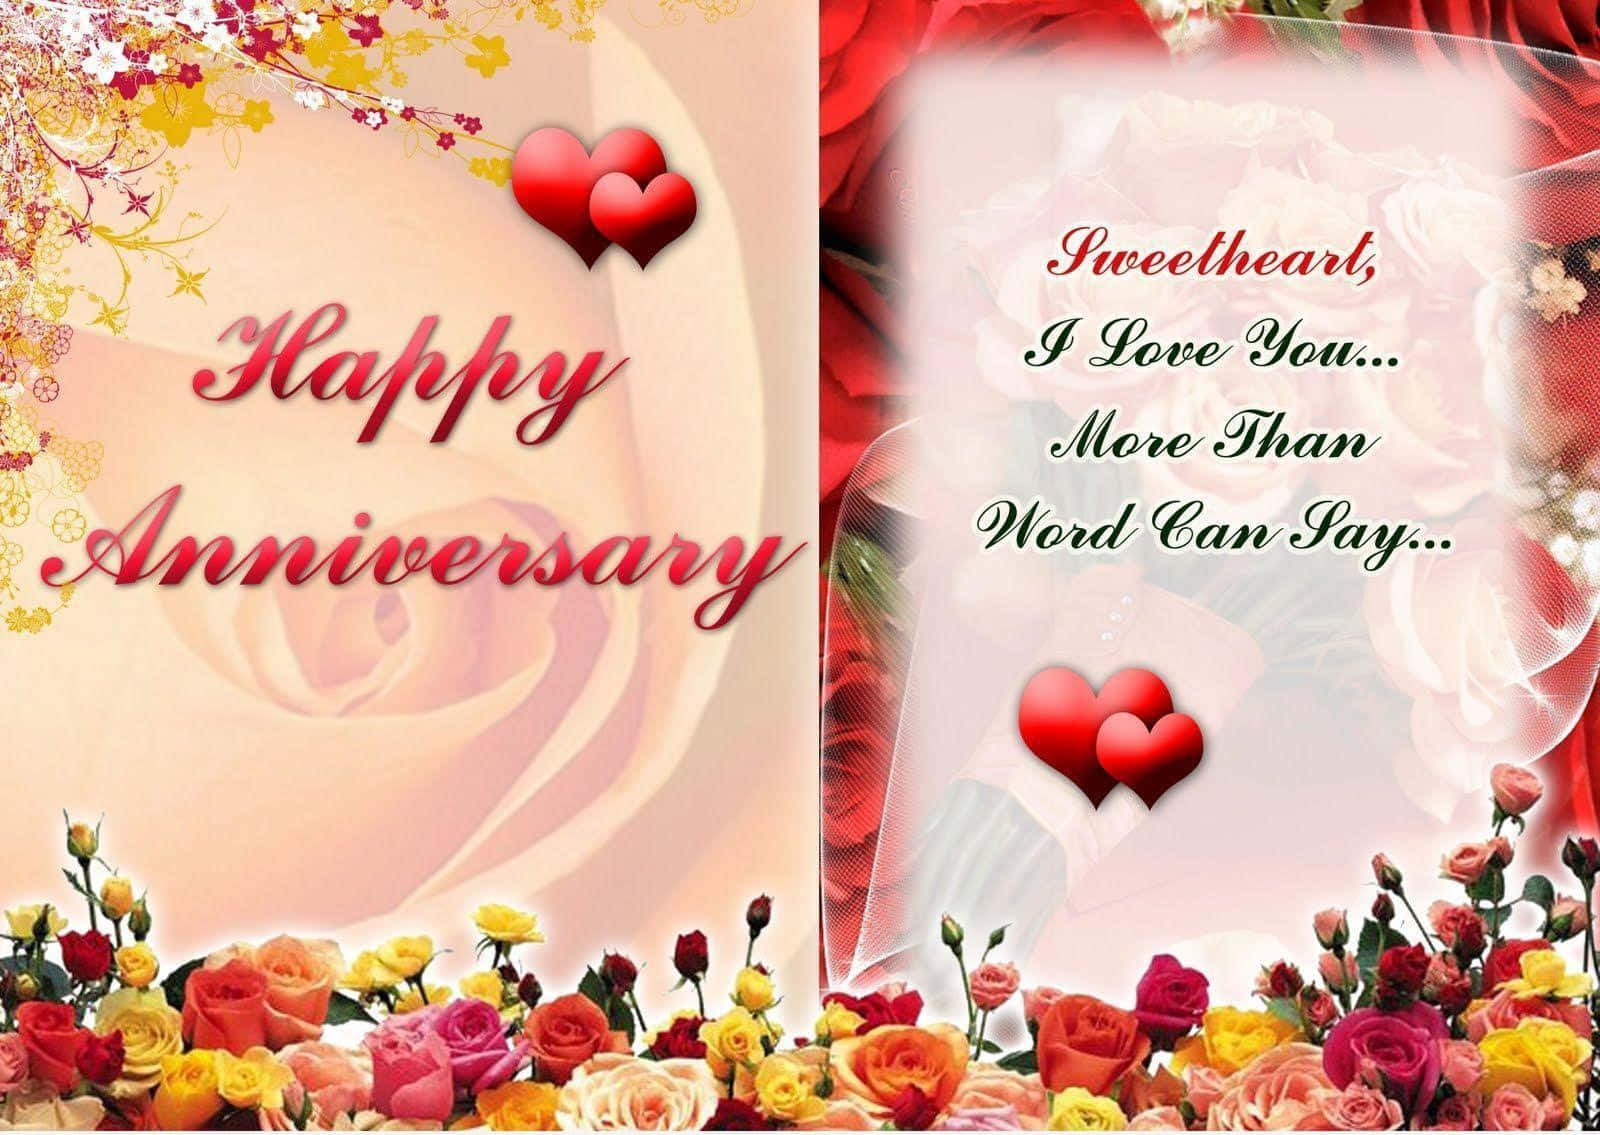 Celebrate Love and Togetherness - Happy Anniversary!